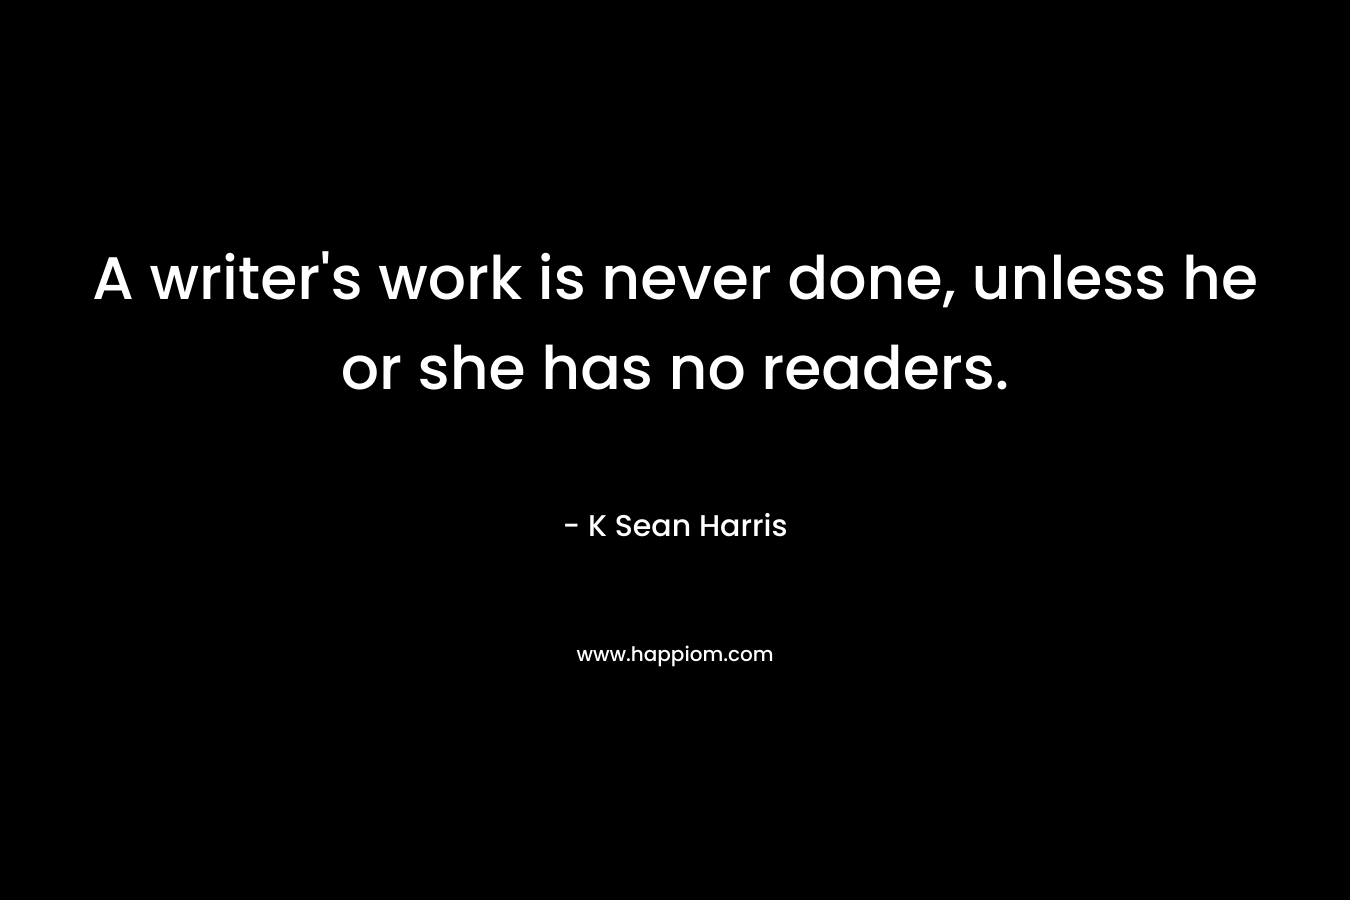 A writer’s work is never done, unless he or she has no readers. – K Sean Harris